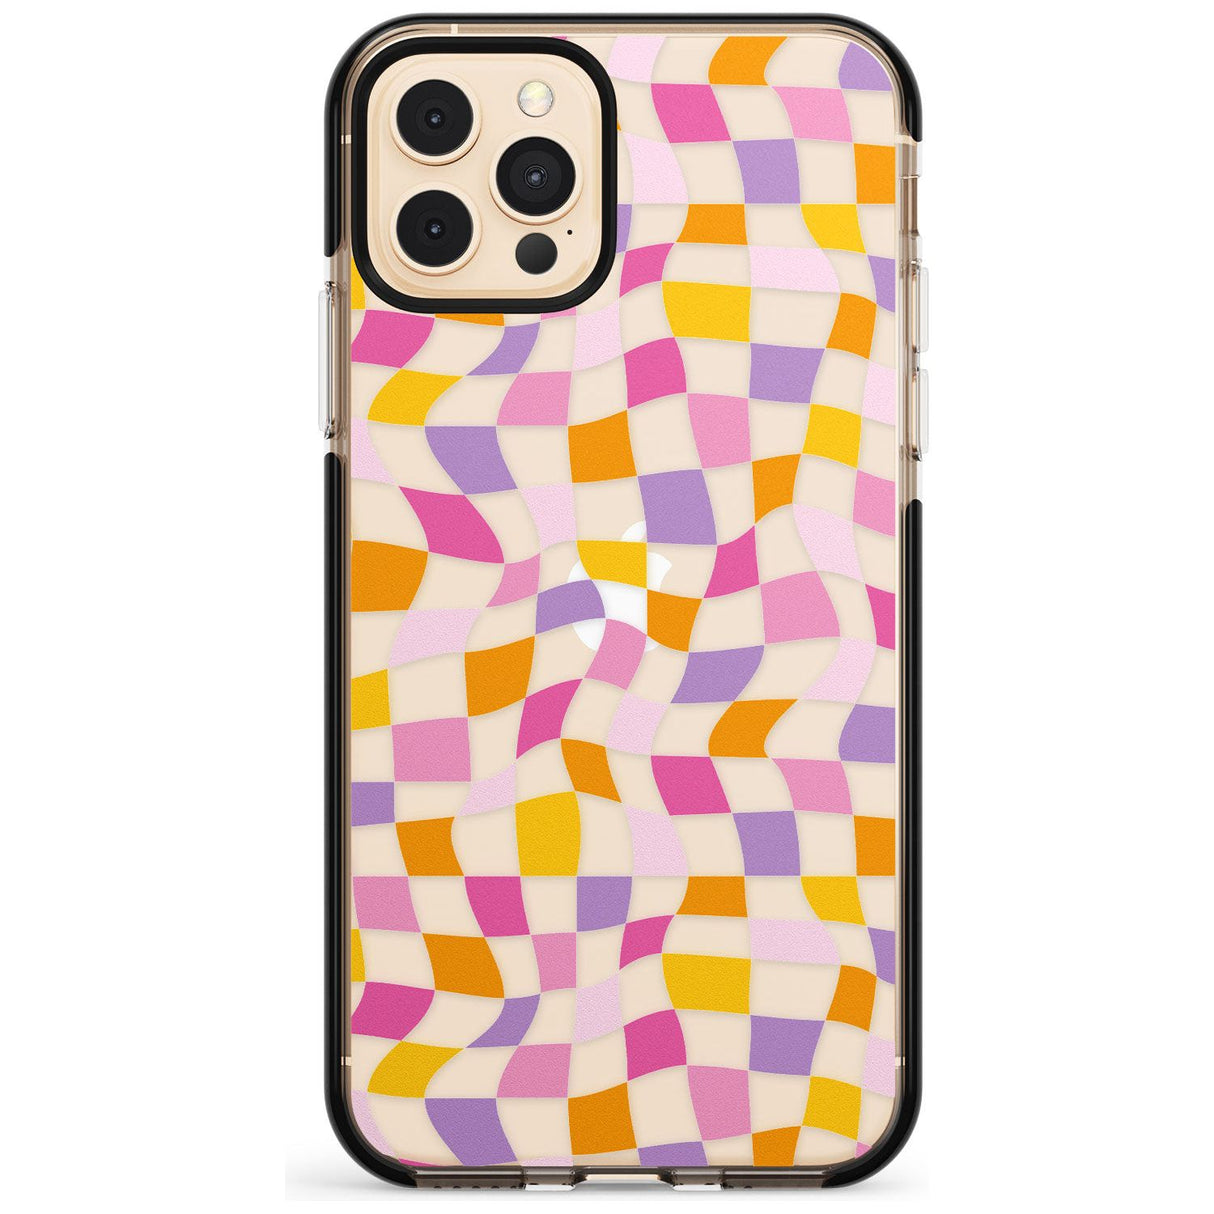 Wonky Squares Pattern Black Impact Phone Case for iPhone 11